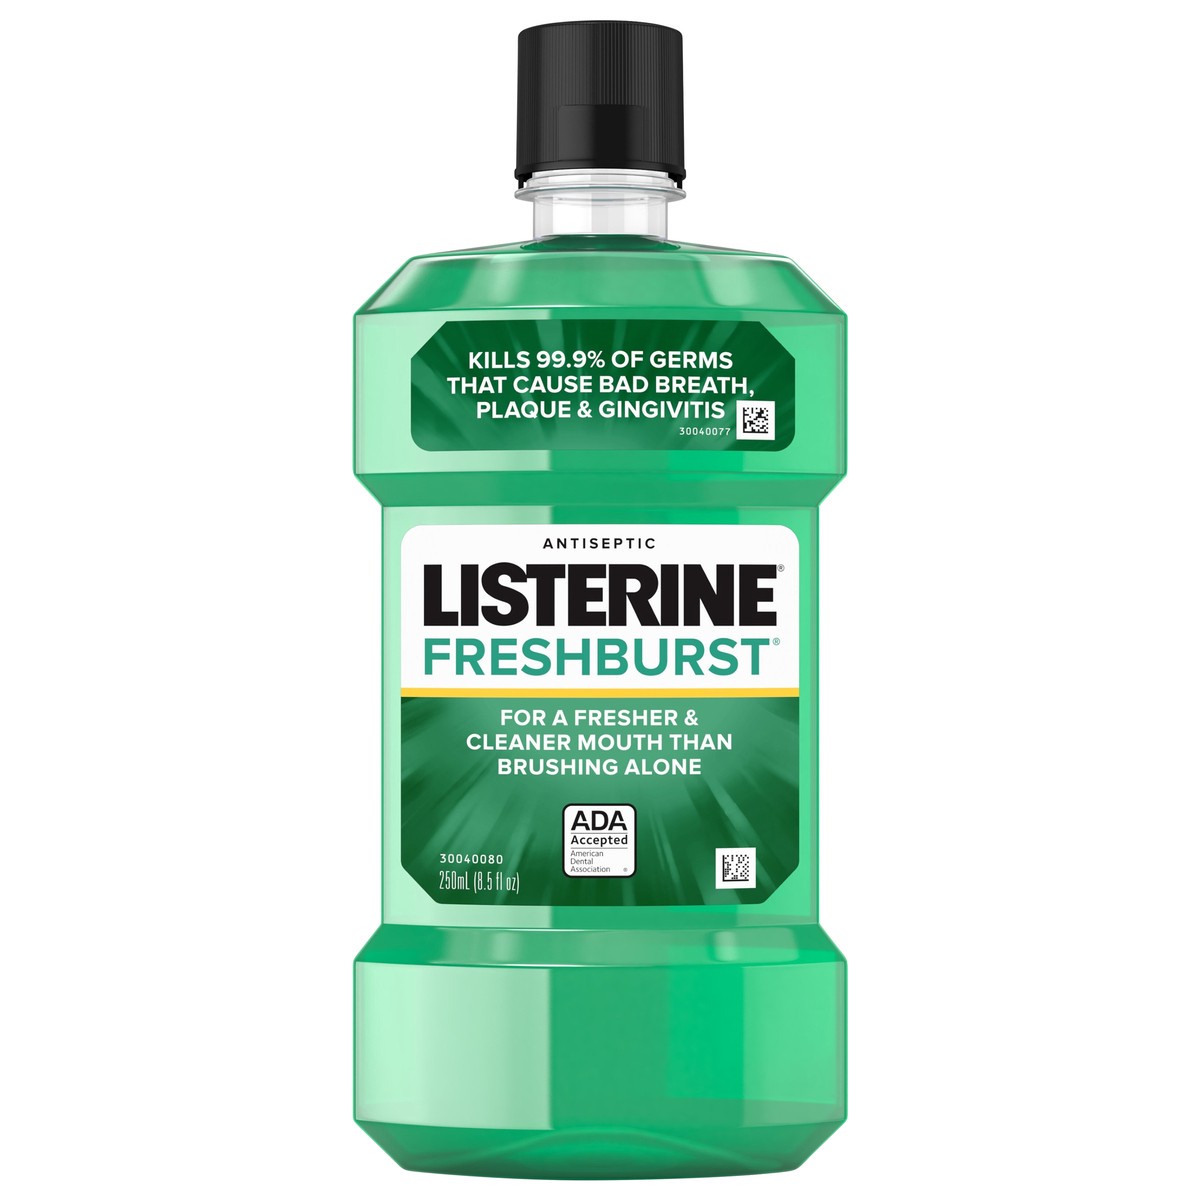 slide 1 of 7, Listerine Freshburst Antiseptic Mouthwash for Bad Breath, Kills 99% of Germs that Cause Bad Breath & Fight Plaque & Gingivitis, ADA Accepted Mouthwash, Spearmint, 250 ml